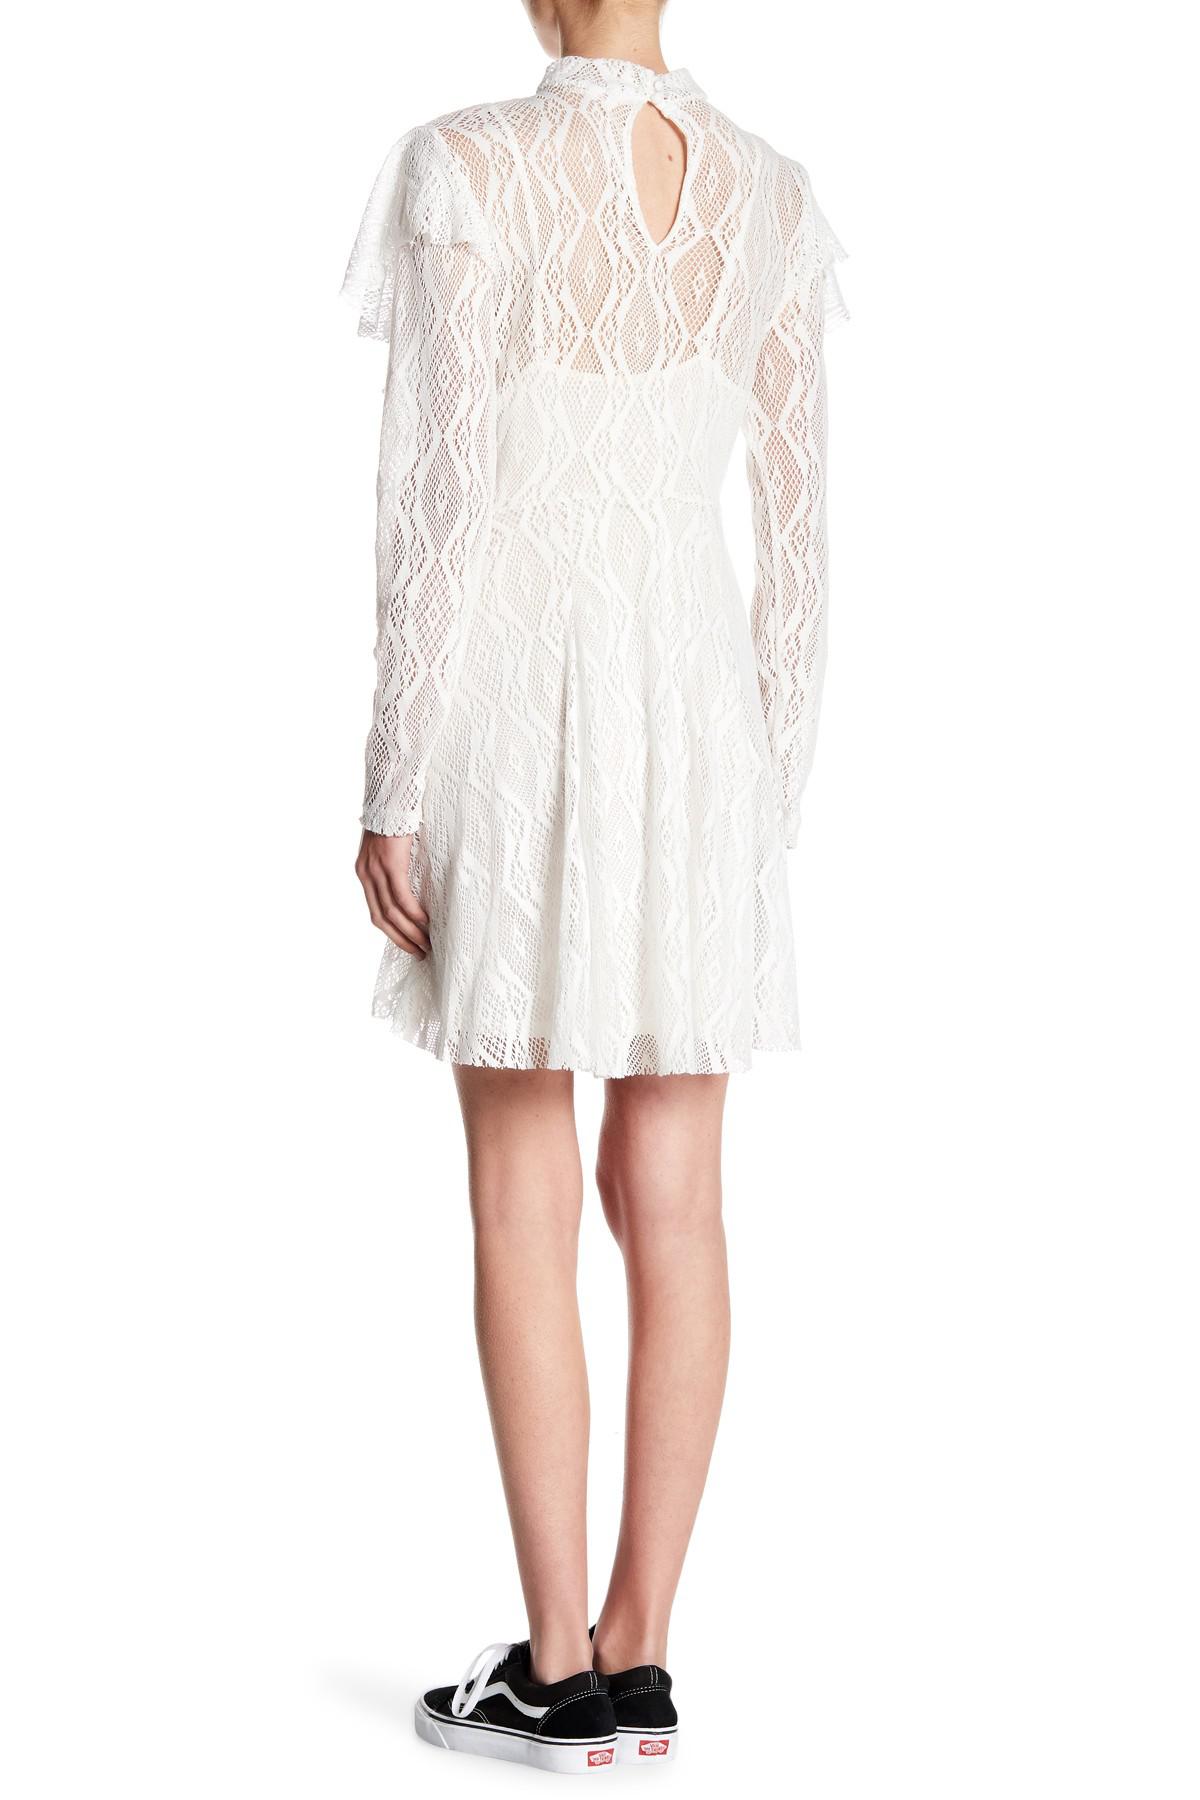 Download Free People Mock Neck Lace Dress in White - Lyst